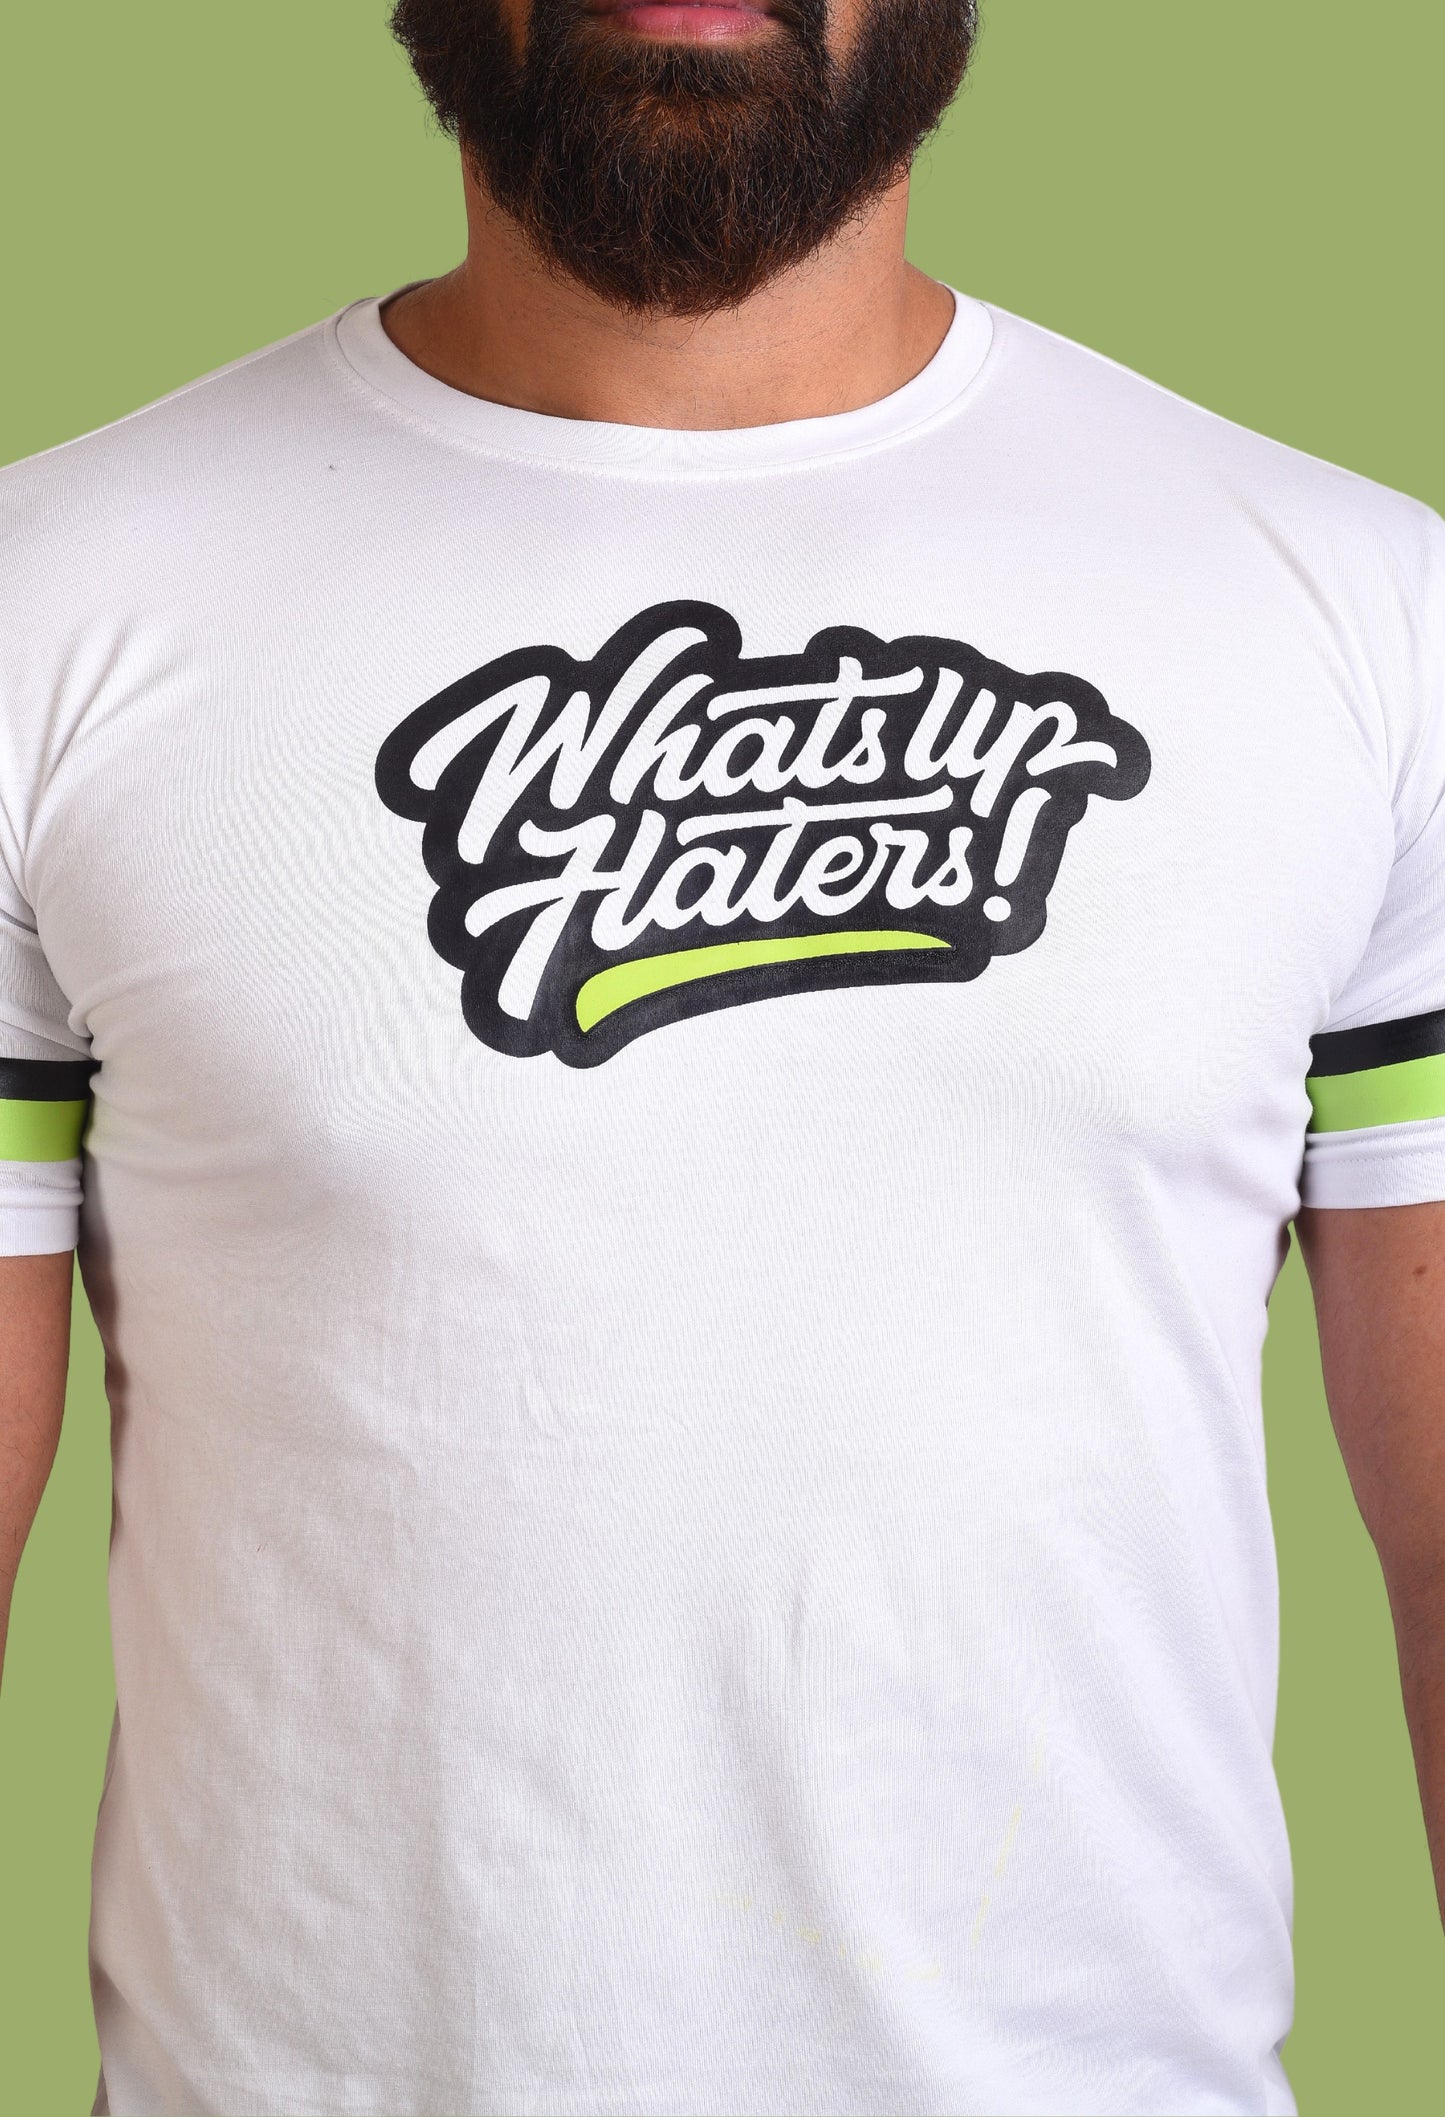 Gym T Shirt - What's Up Haters with premium cotton Lycra. The Sports T Shirt by Strong Soul